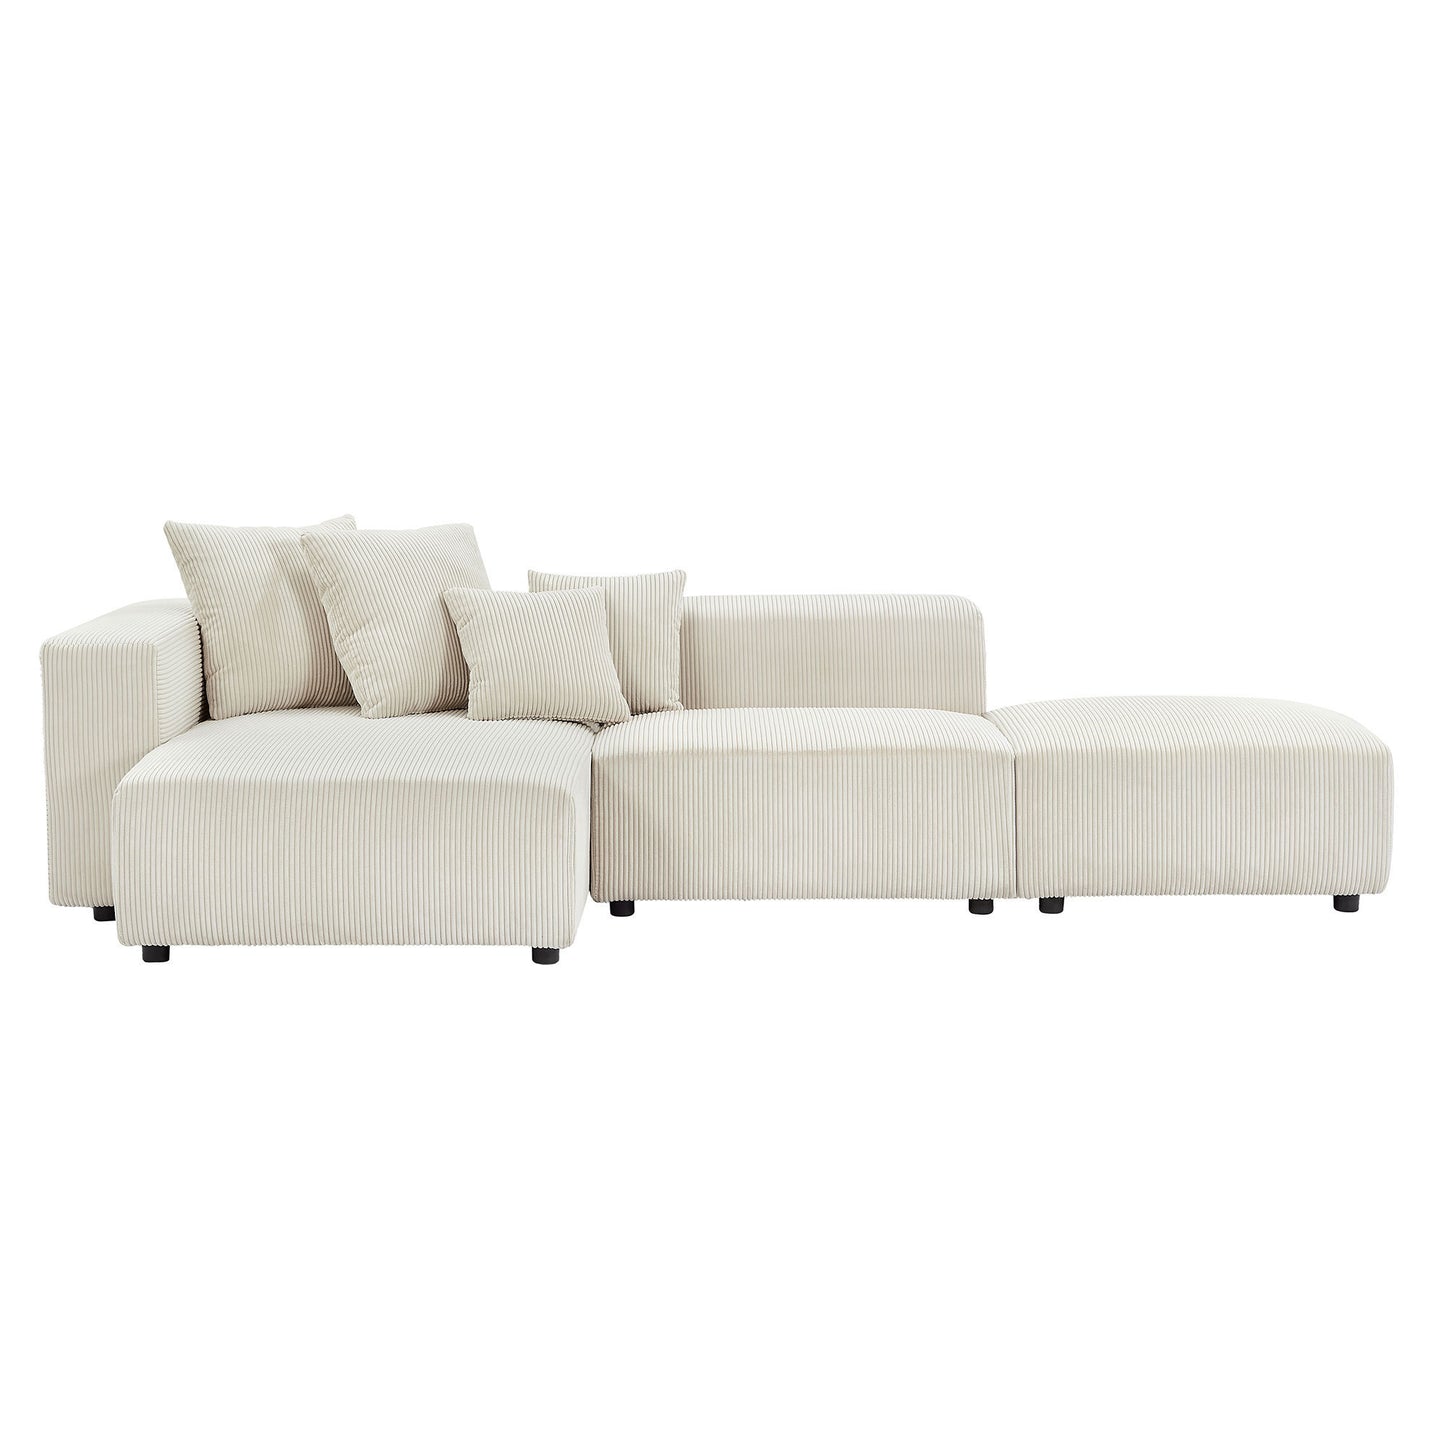 Soft Corduroy Sectional Modular Sofa Set, Small L-Shaped Chaise Couch for Living Room, Apartment, Office, Beige